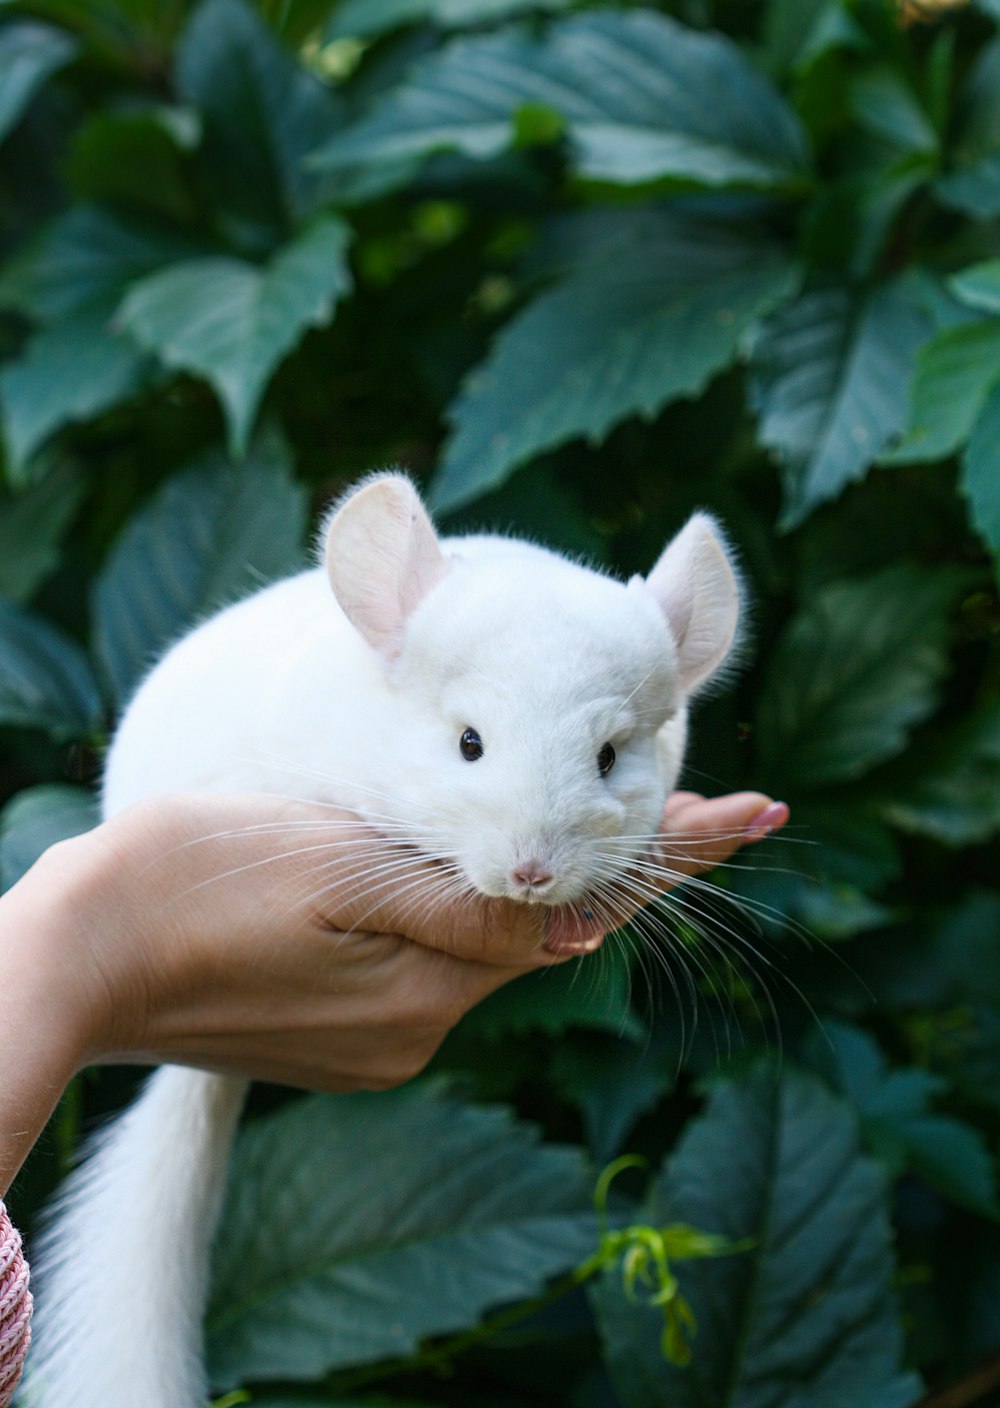 white rabbit on persons hand